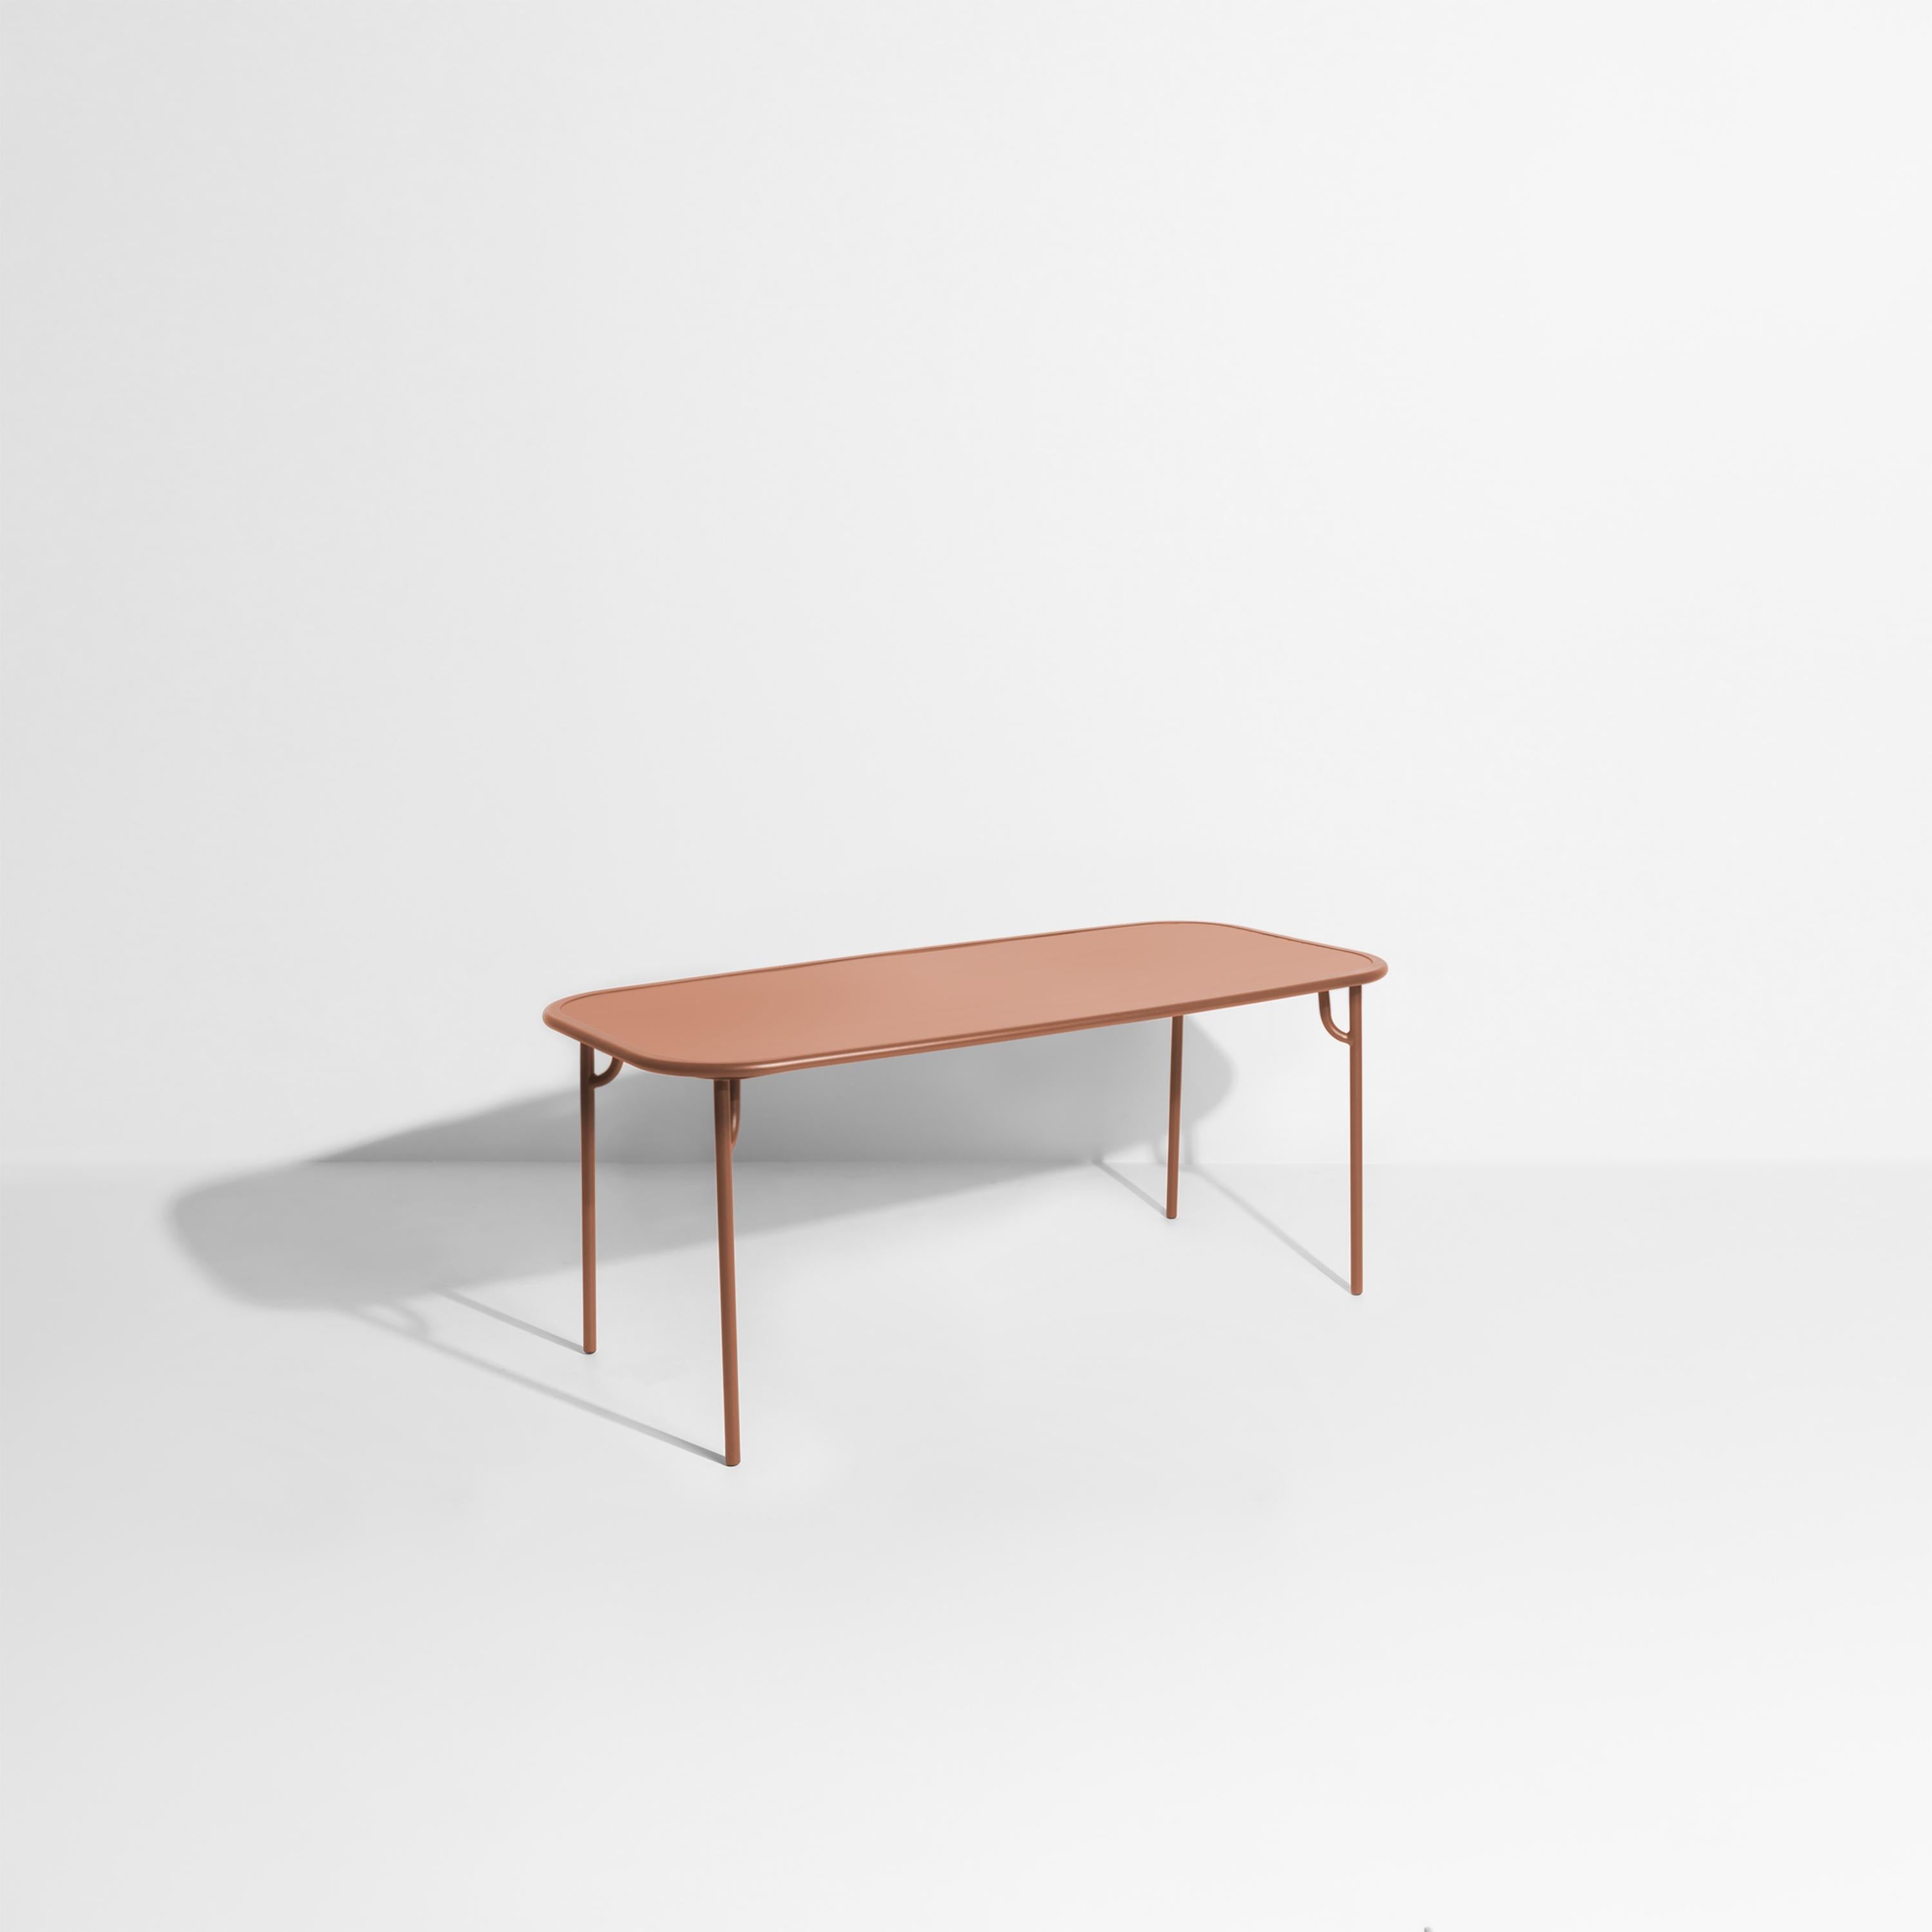 Petite Friture Week-End Medium Plain Rectangular Dining Table in Terracotta Aluminium by Studio BrichetZiegler, 2017

The week-end collection is a full range of outdoor furniture, in aluminium grained epoxy paint, matt finish, that includes 18